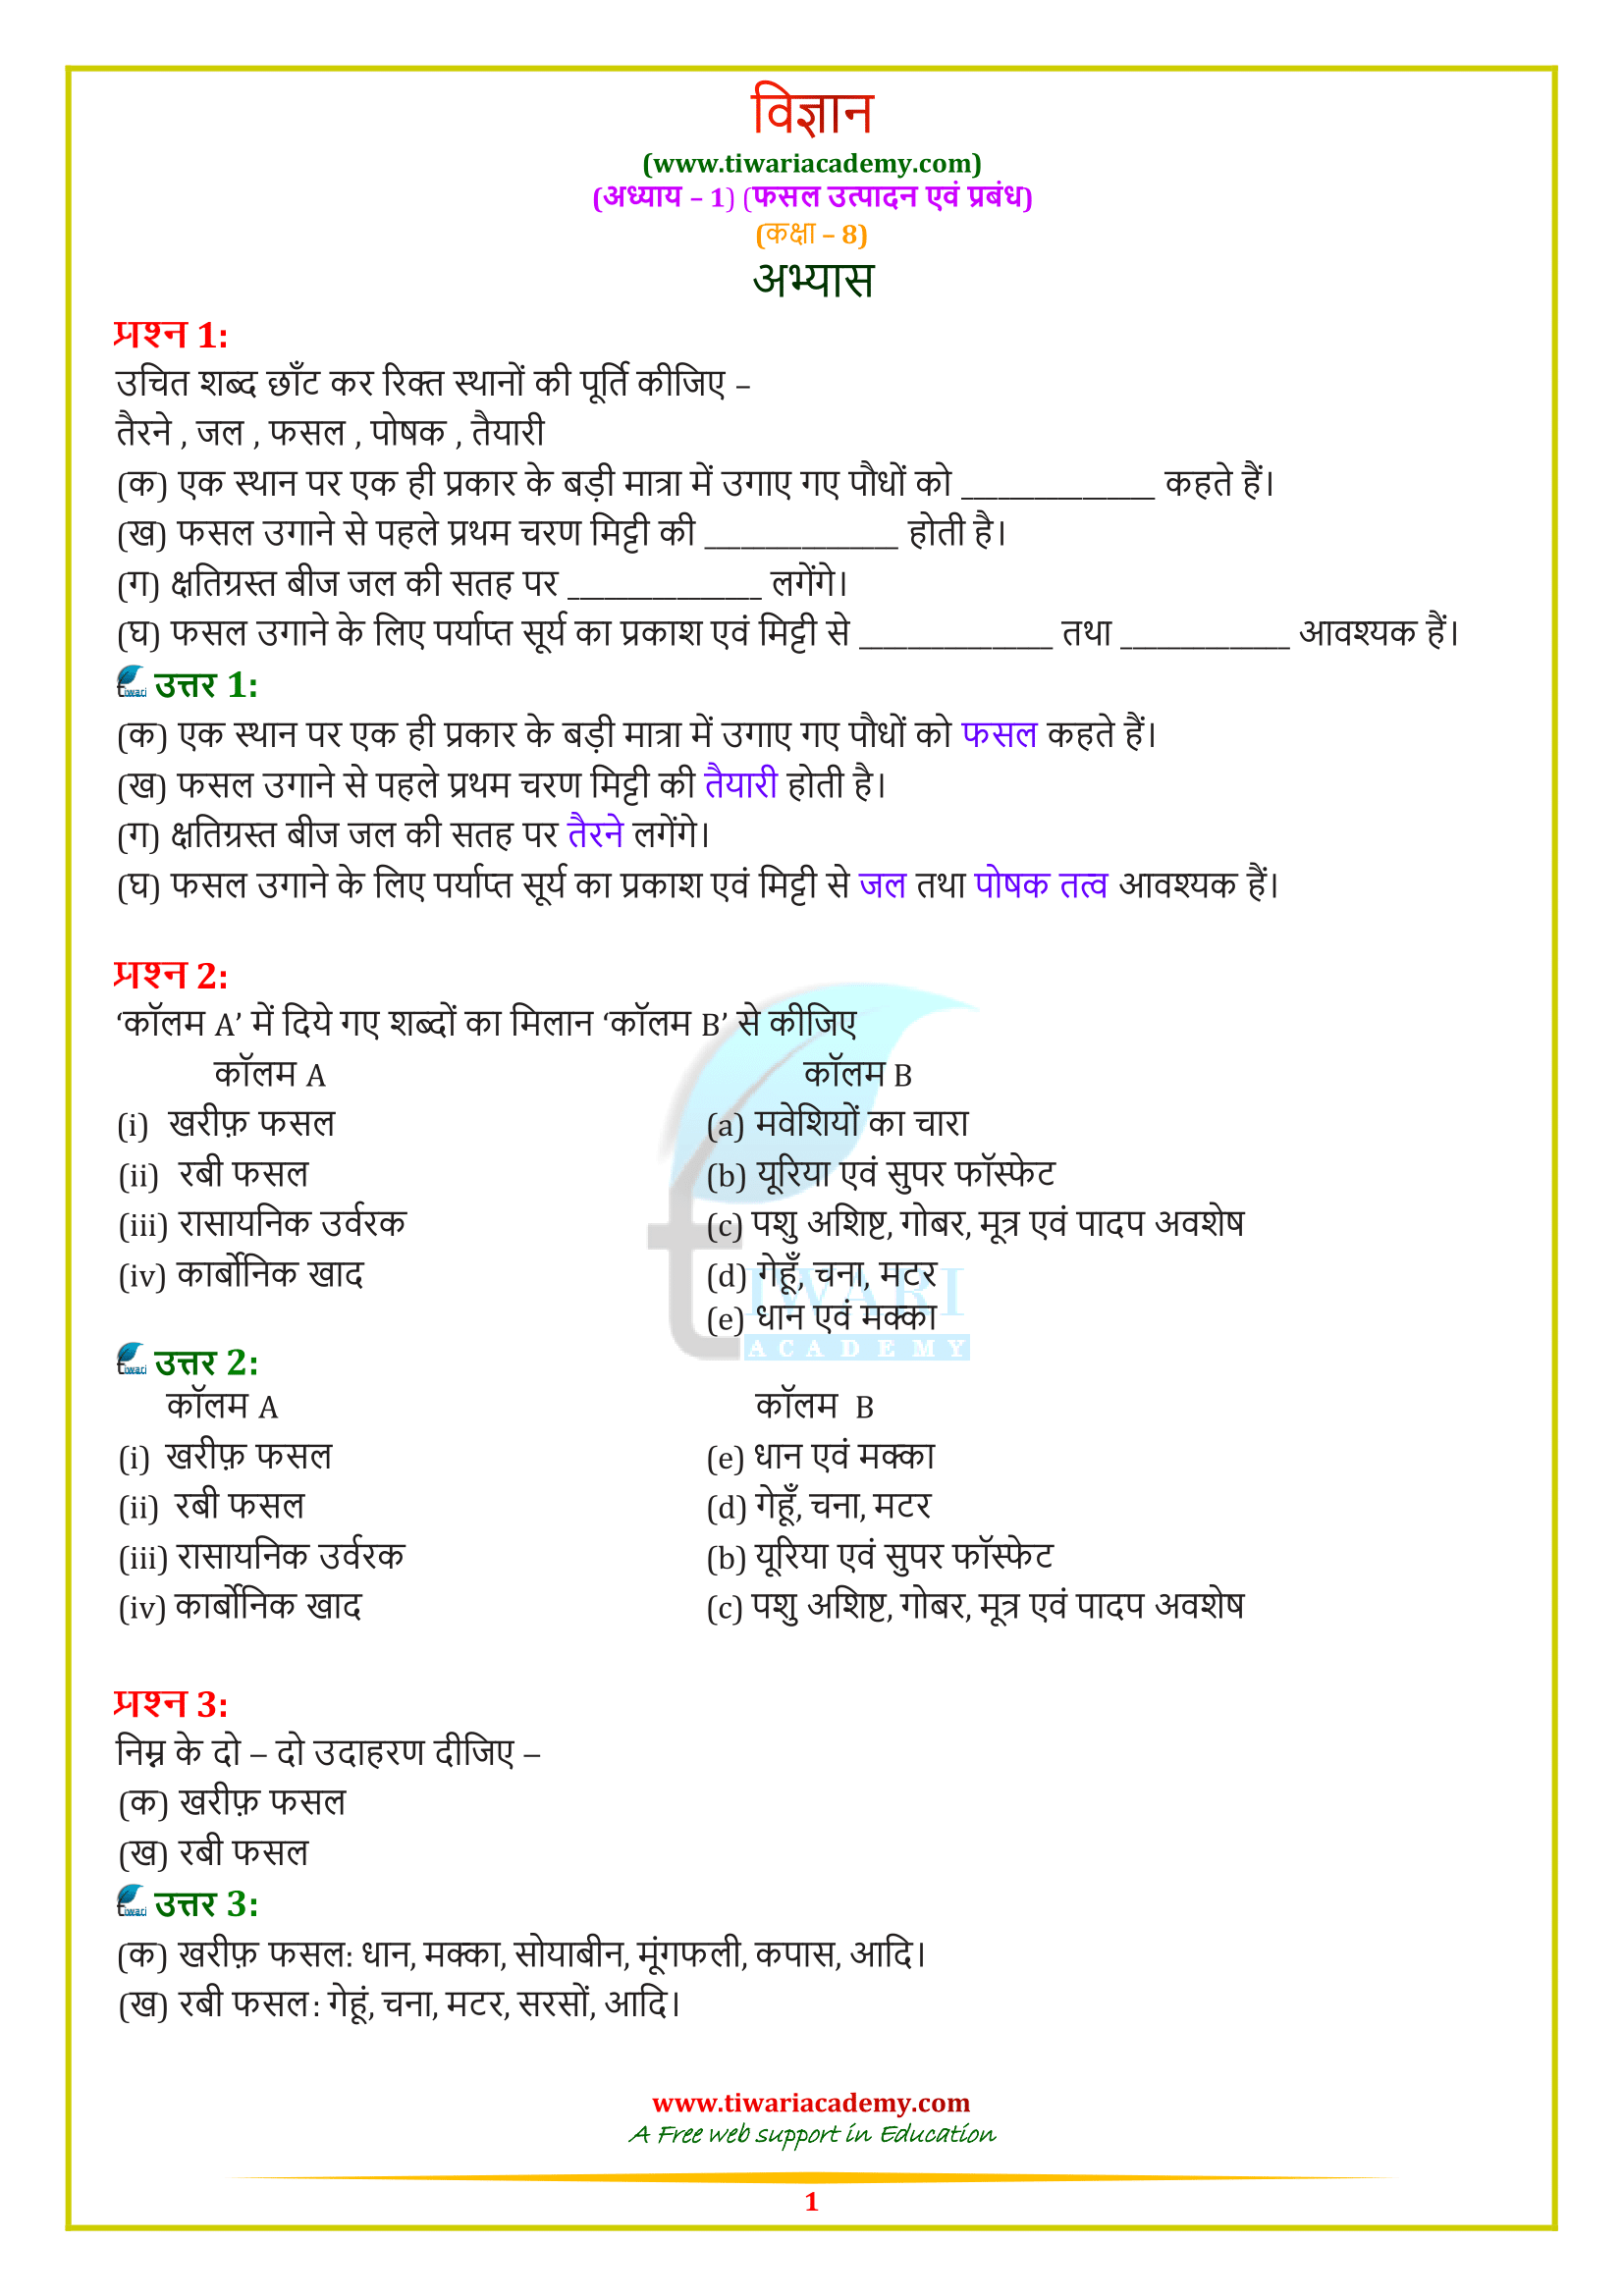 NCERT Solutions for Class 8 Science Chapter 1 in Hindi Medium